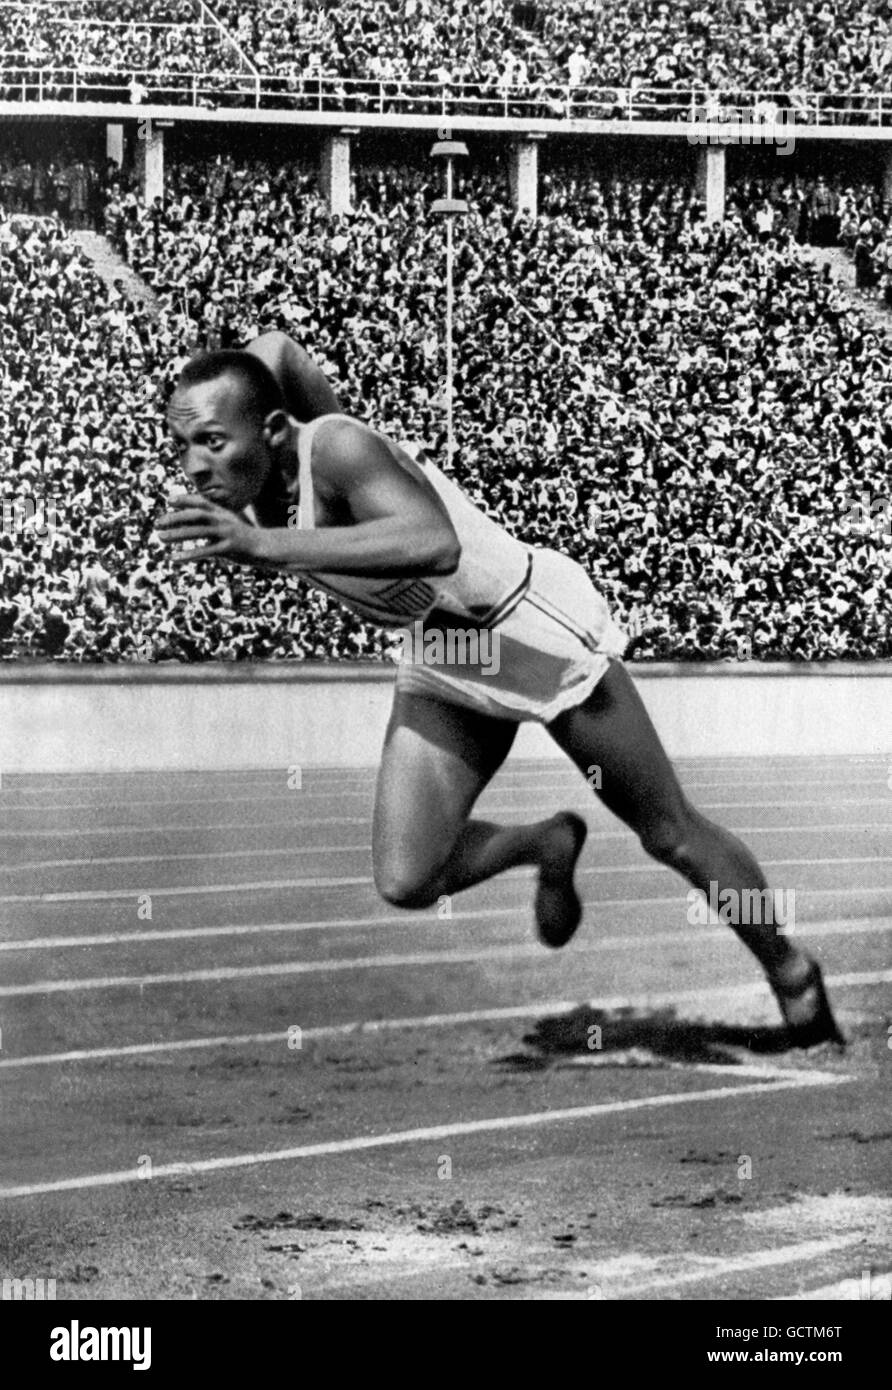 Jesse Owens at the start of his record breaking 200m race at the 1936 Berlin Olympics. Stock Photo